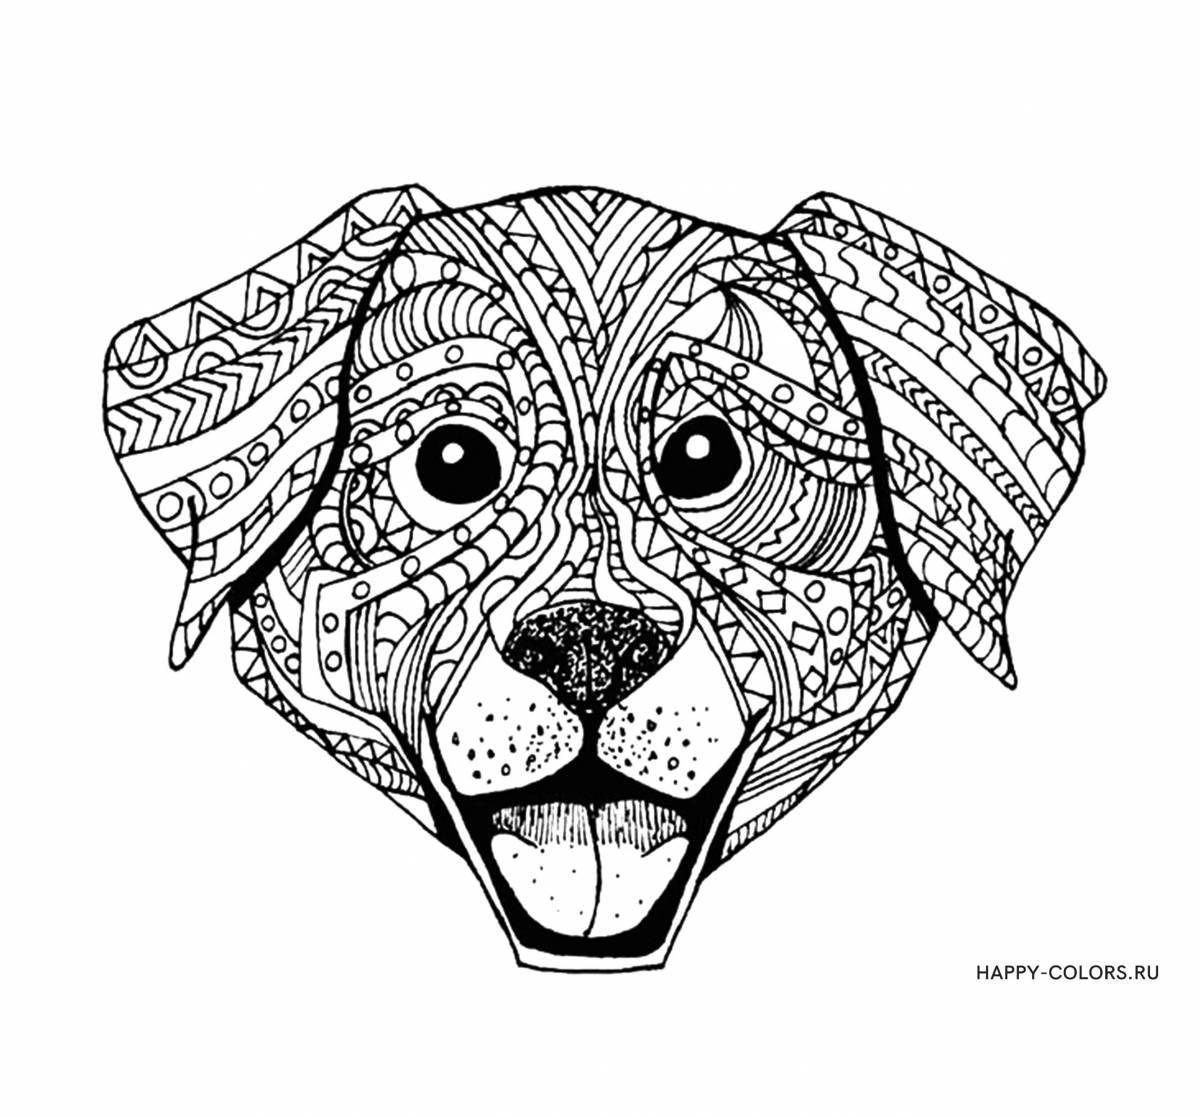 Relaxing anti-stress dog coloring book